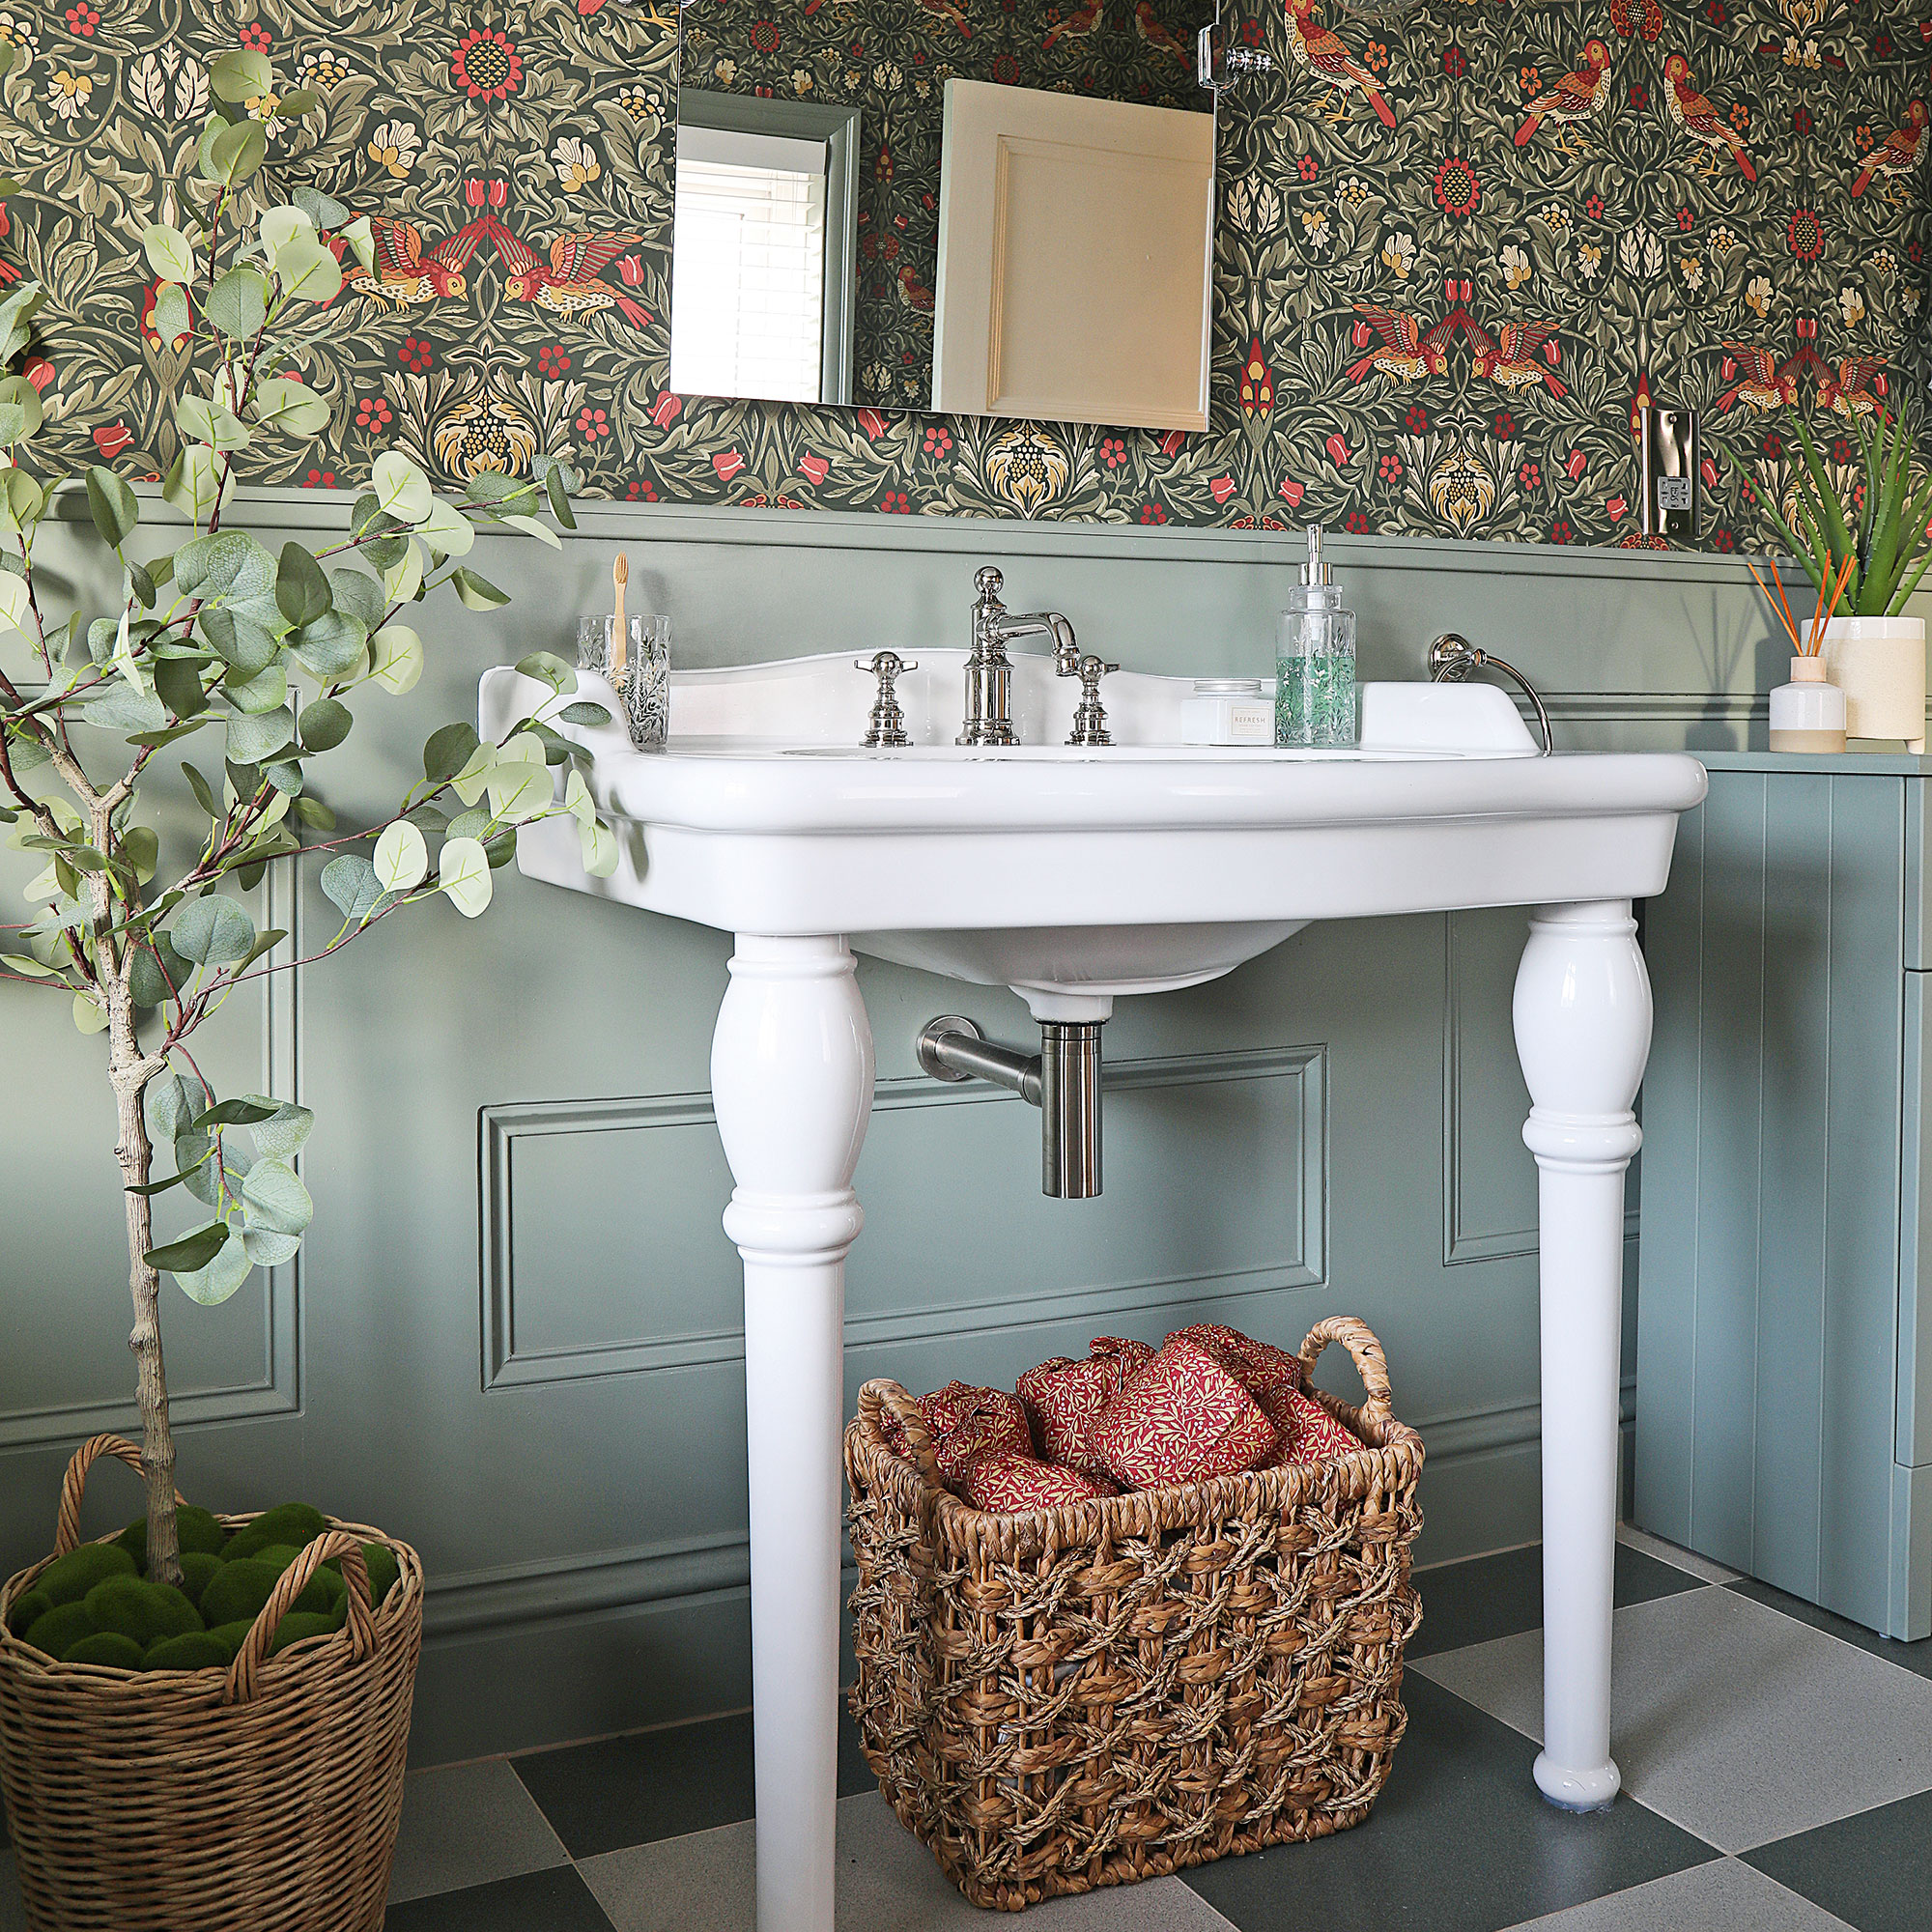 Wallpaper in green bathroom with white sink